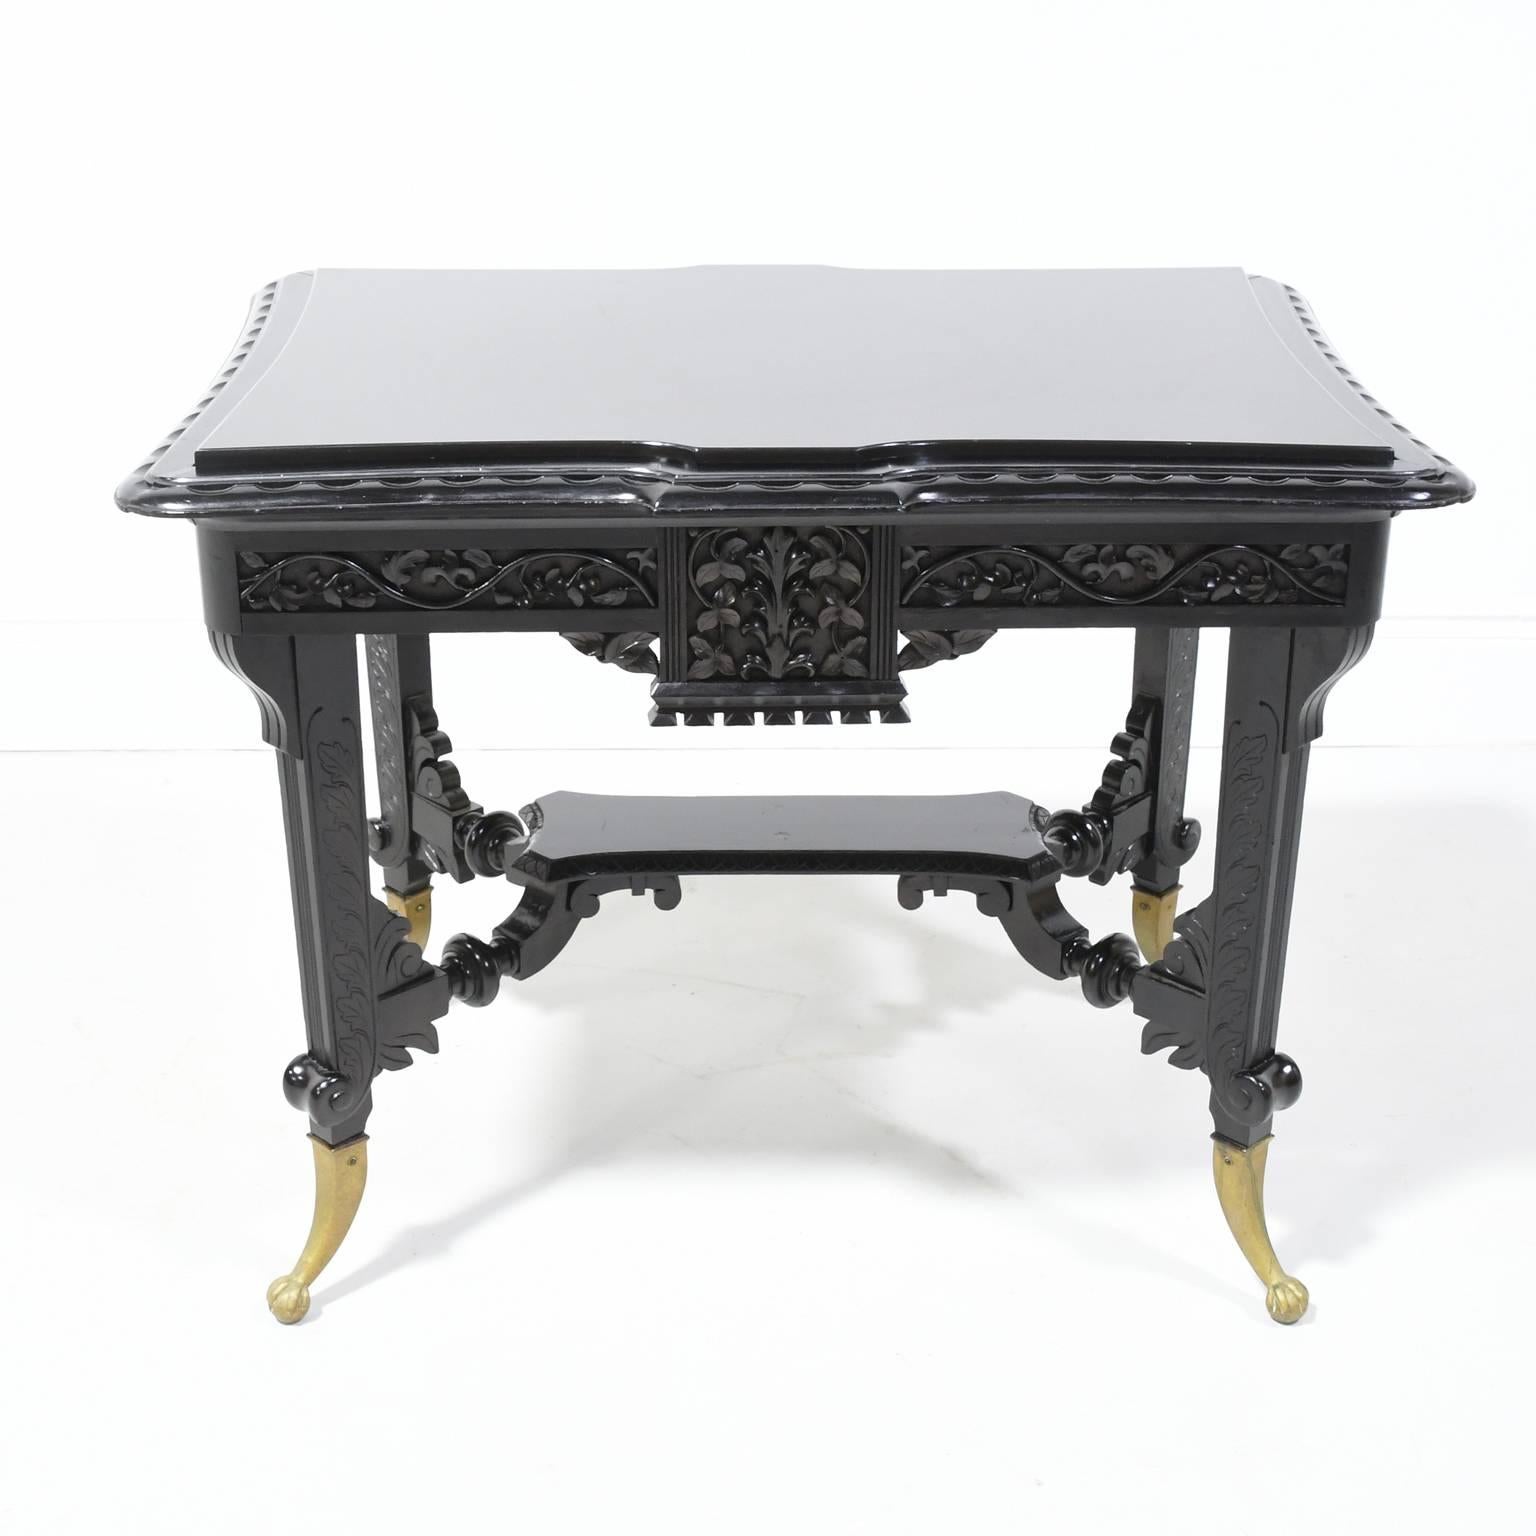 An exquisite table from the Aesthetic Movement of the late 1800s, in ebonized wood with a Belgian black inset marble-top, carved foliage along the apron, carved stretcher supporting bottom shelf, and carved legs resting on brass feet. American (or